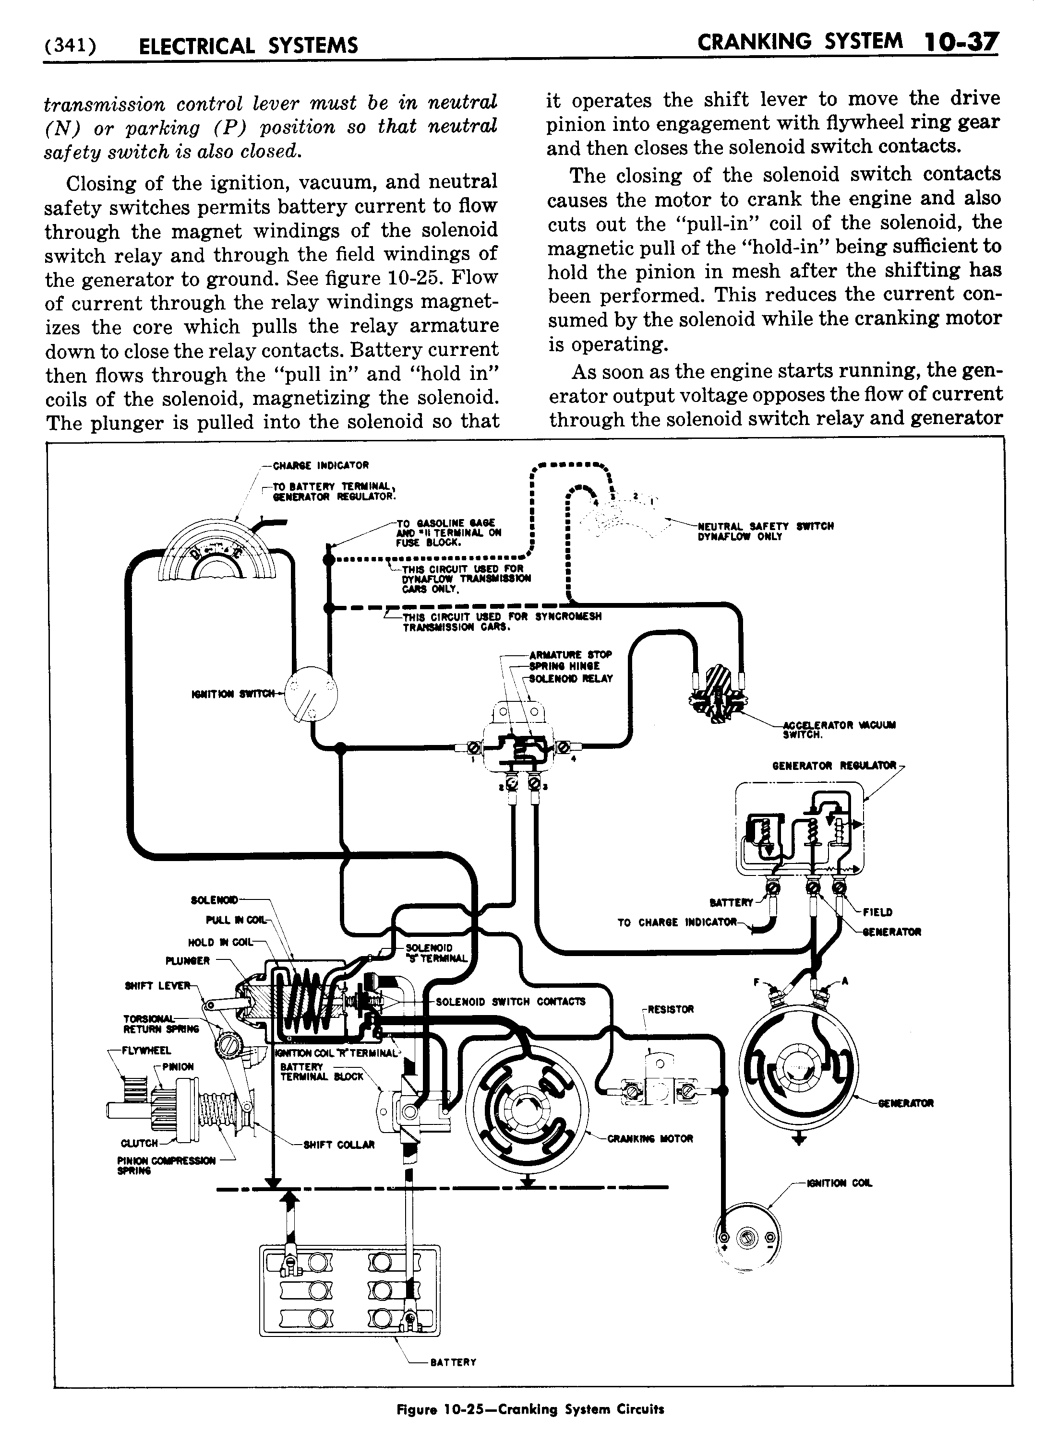 n_11 1955 Buick Shop Manual - Electrical Systems-037-037.jpg